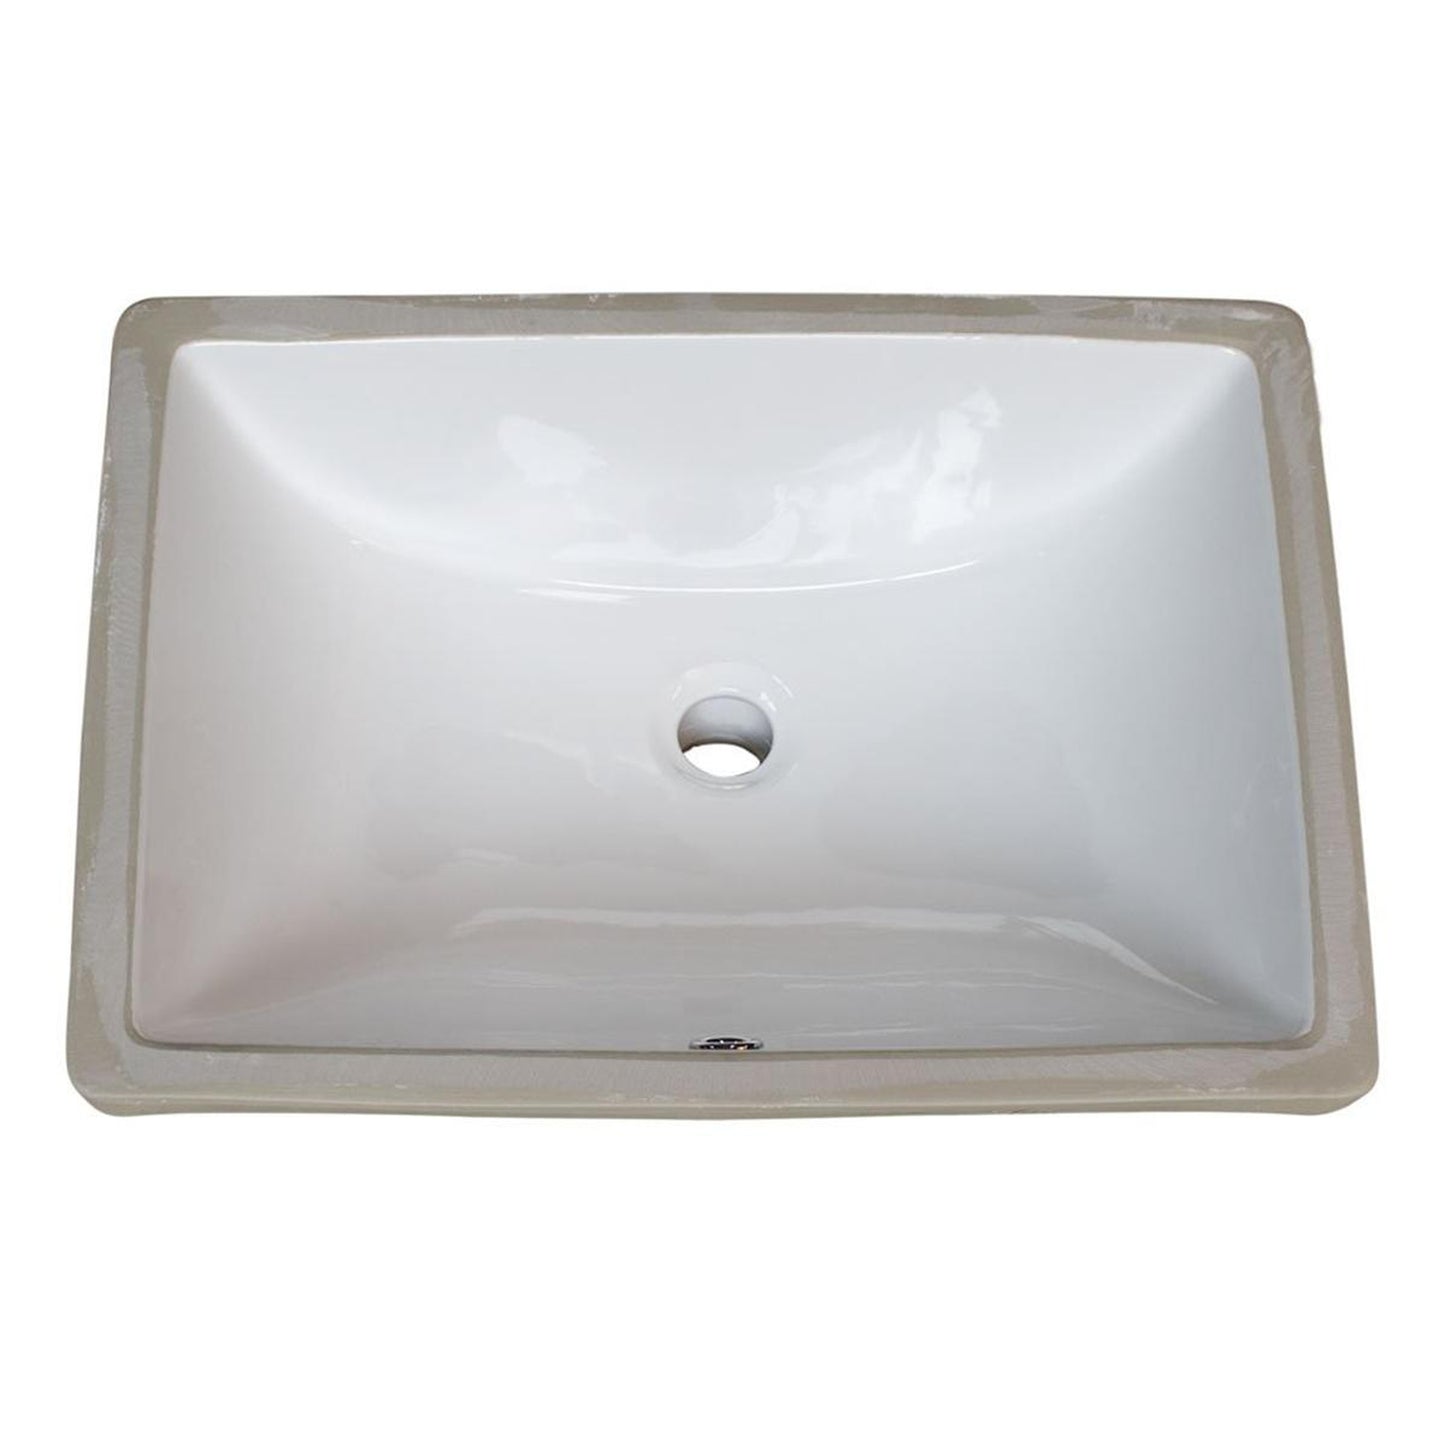 Pelican Int'l Pearl Series PL-3099 18" x 13" Individually Packaged White Porcelain Undermount Bathroom Sink